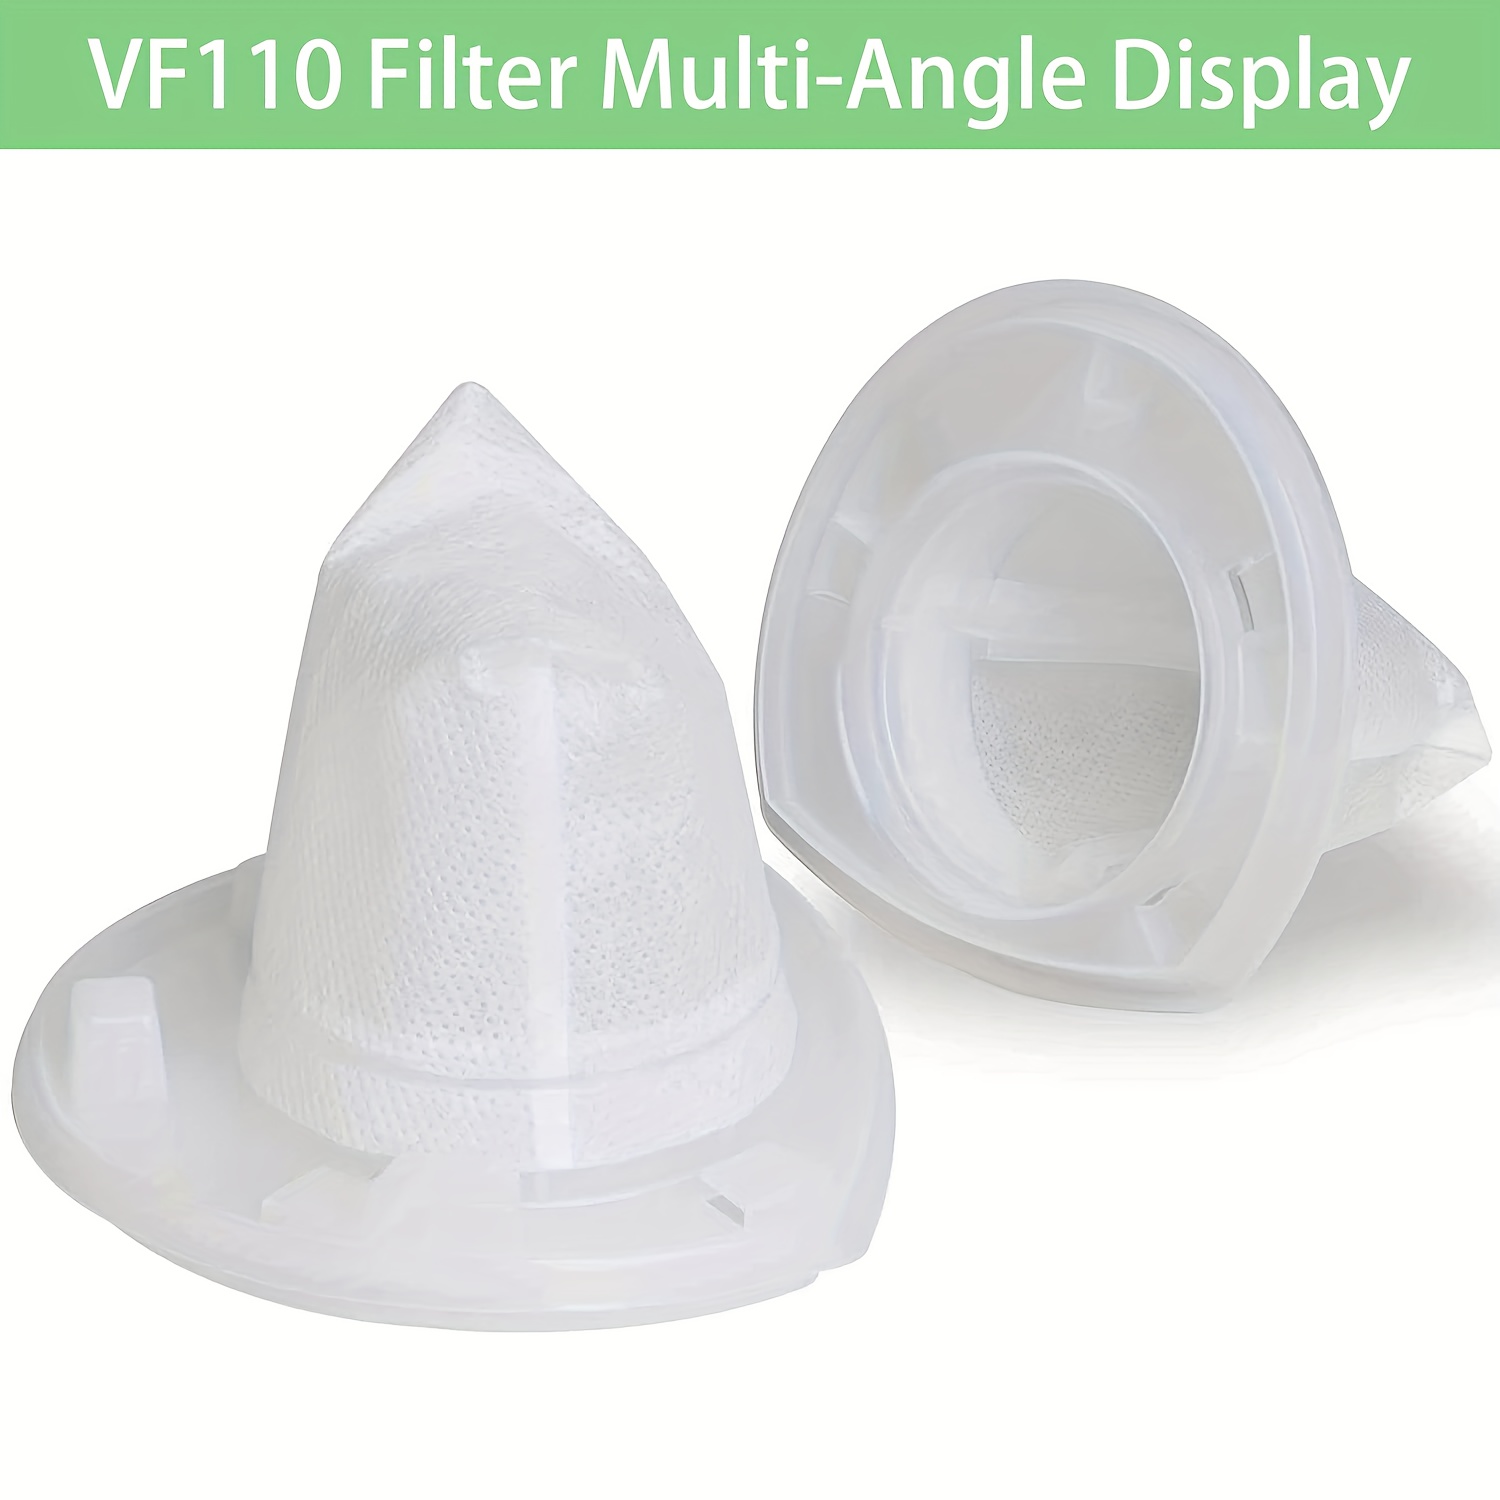 4 Pack Replacement Filter for Black & Decker Power Tools VF110